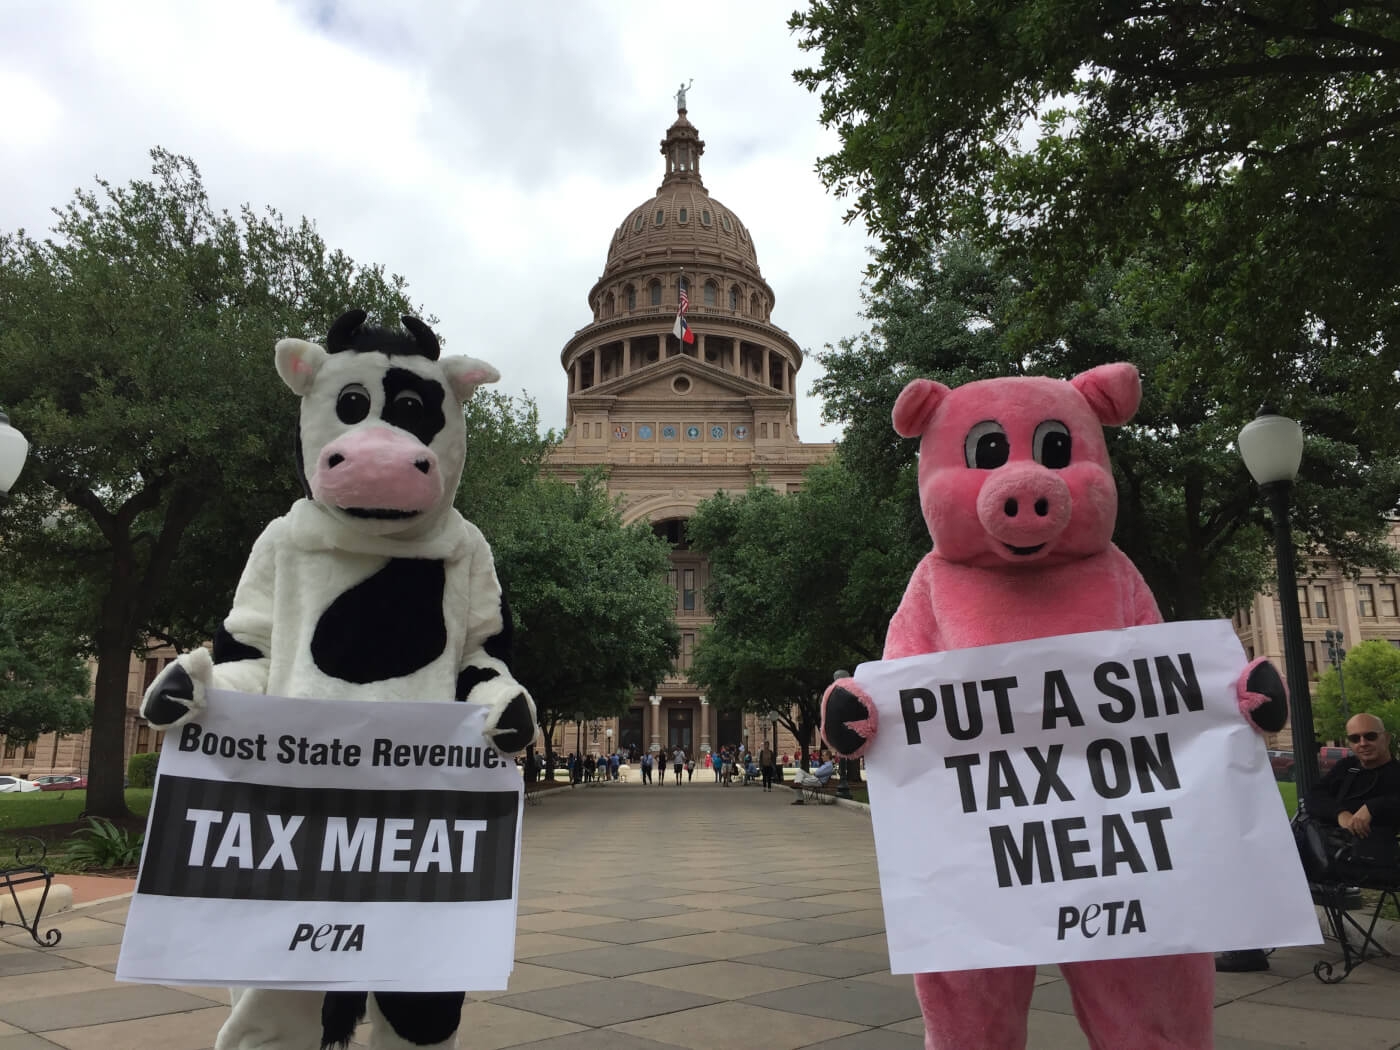 PETA protesters at a meat-consumption protest in front of Texas state legislature, 2017. 